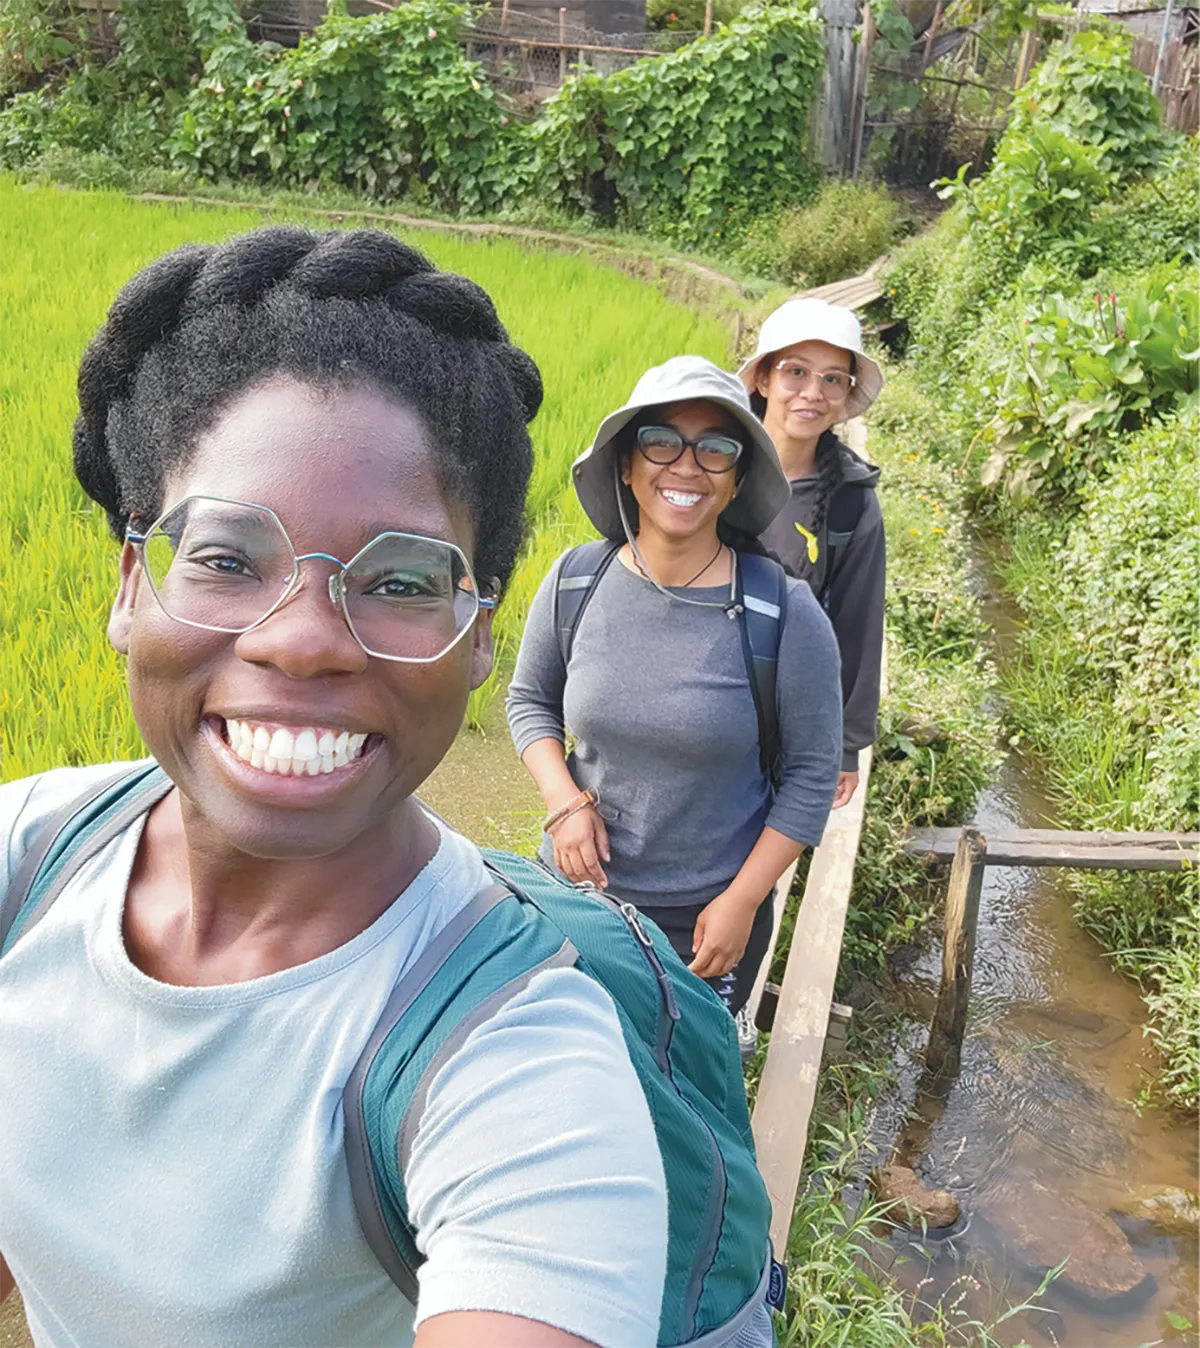 Anecia Gentles, Stèphie Raveloson, and Sidonie Rakotoarisoa heading out on their first day of field work for the project.